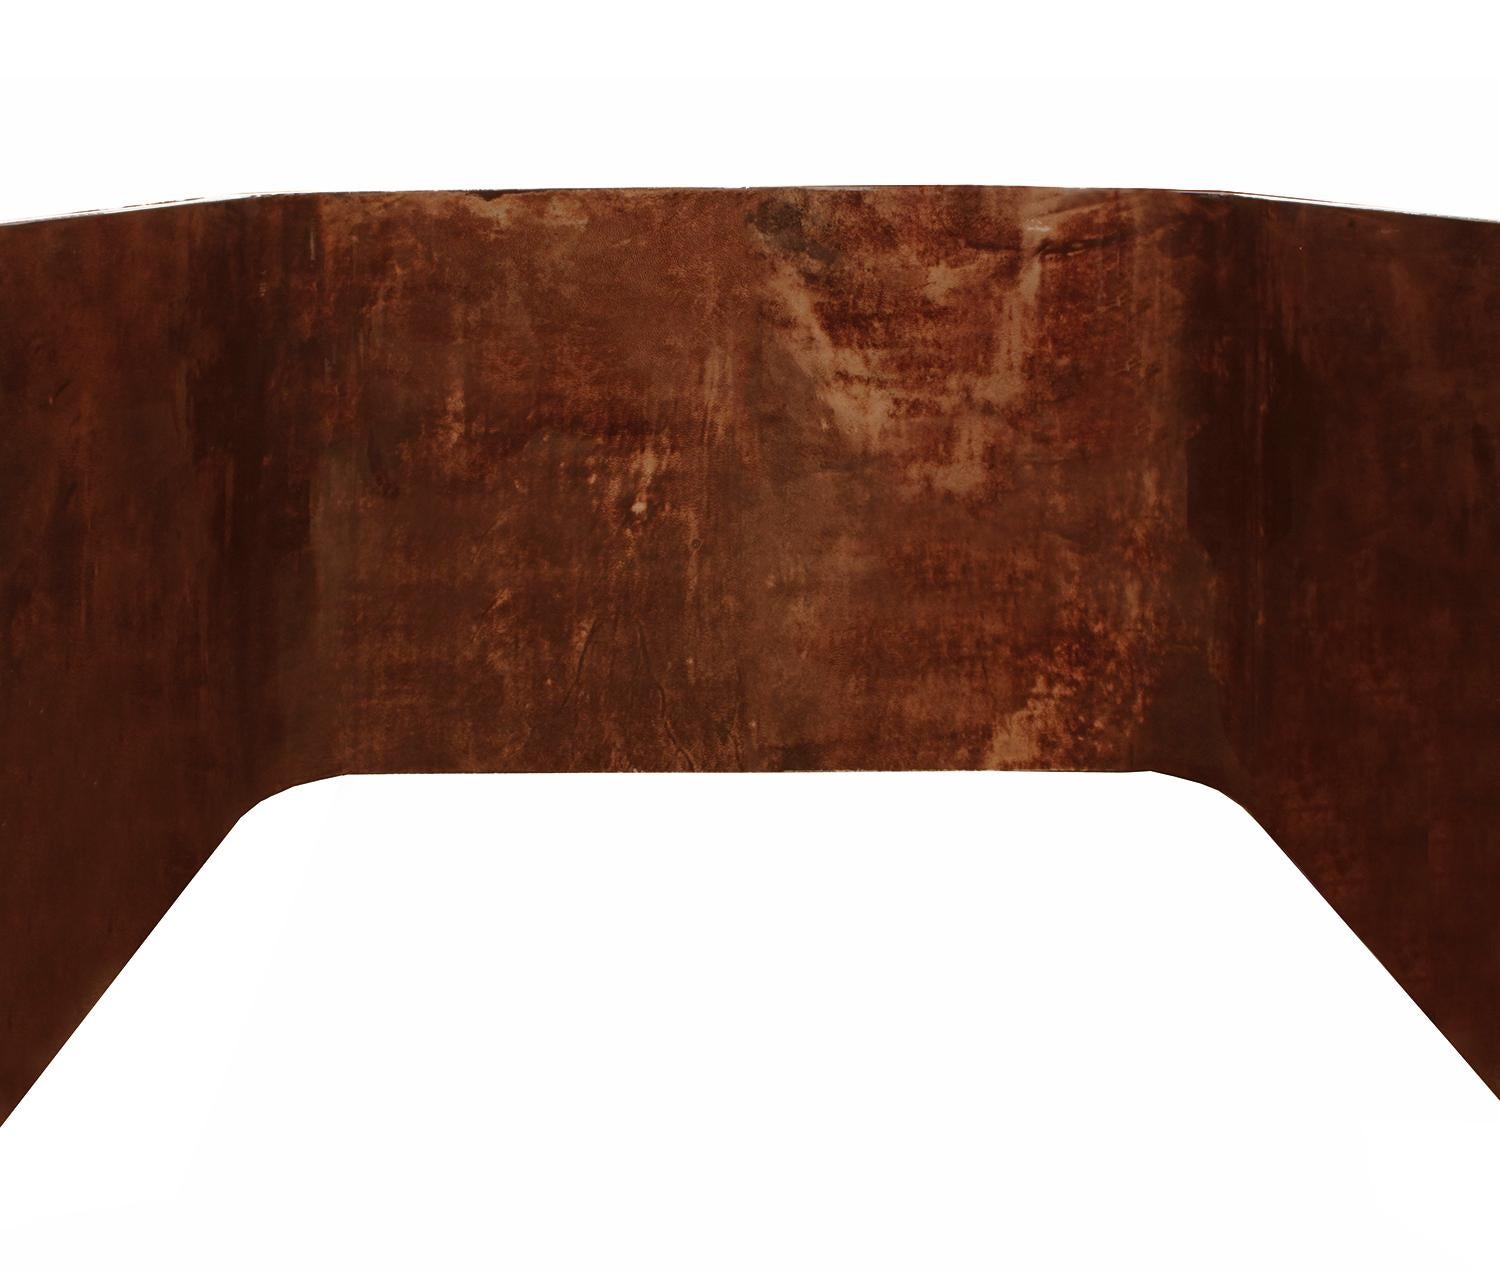 Petit waterfall coffee table in lacquered goatskin by Karl Springer, American, 1970s. The underside of the table is also finished in lacquered goatskin. The quality of this table is extraordinary.